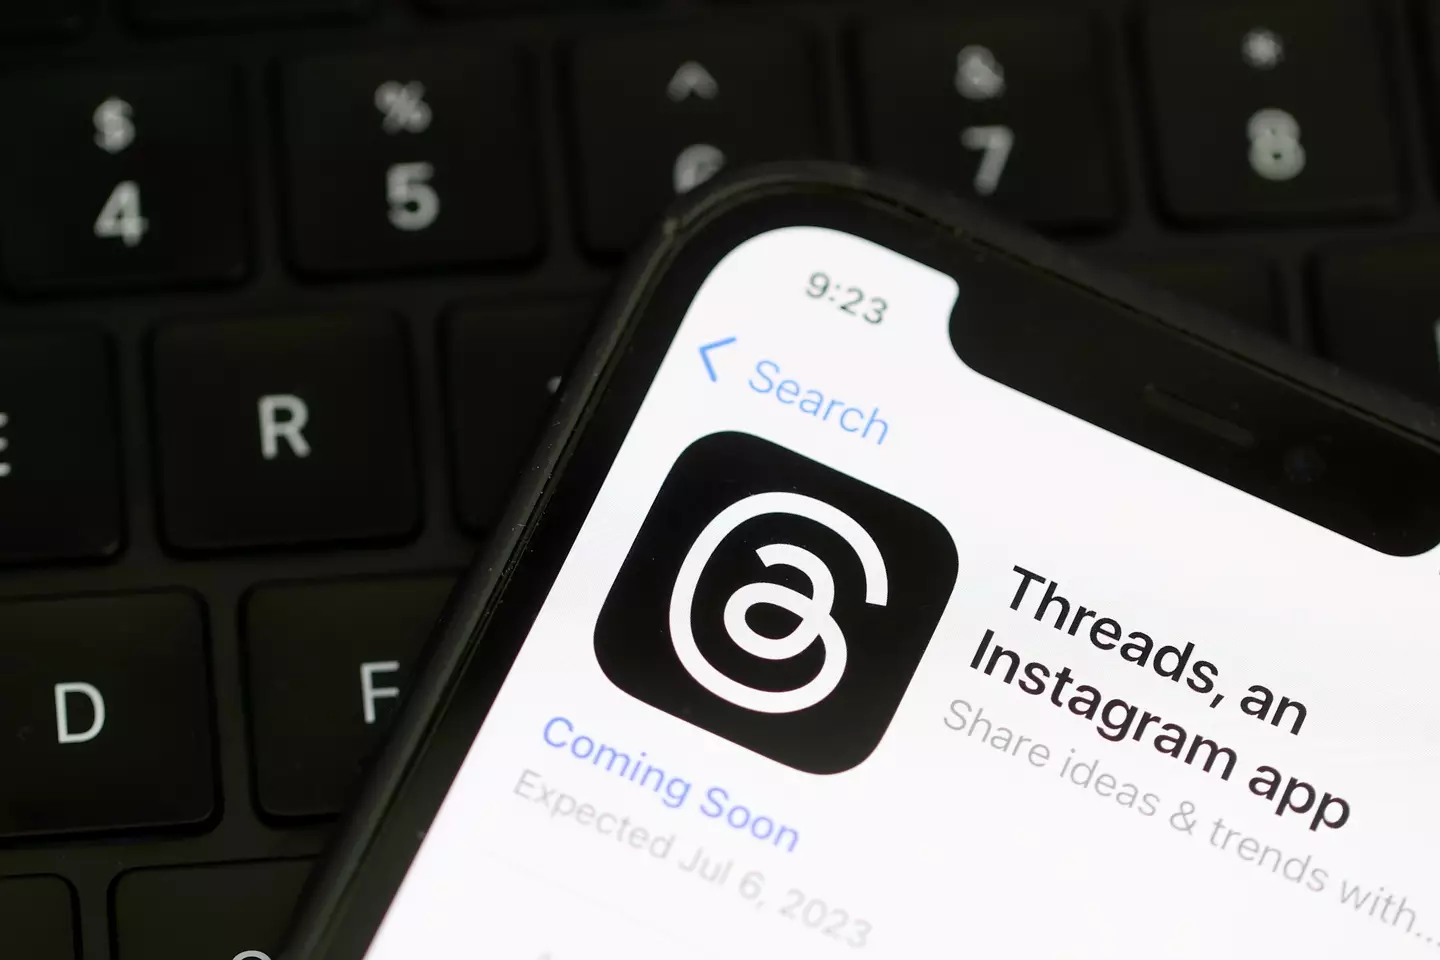 Threads was launched today (6 July).